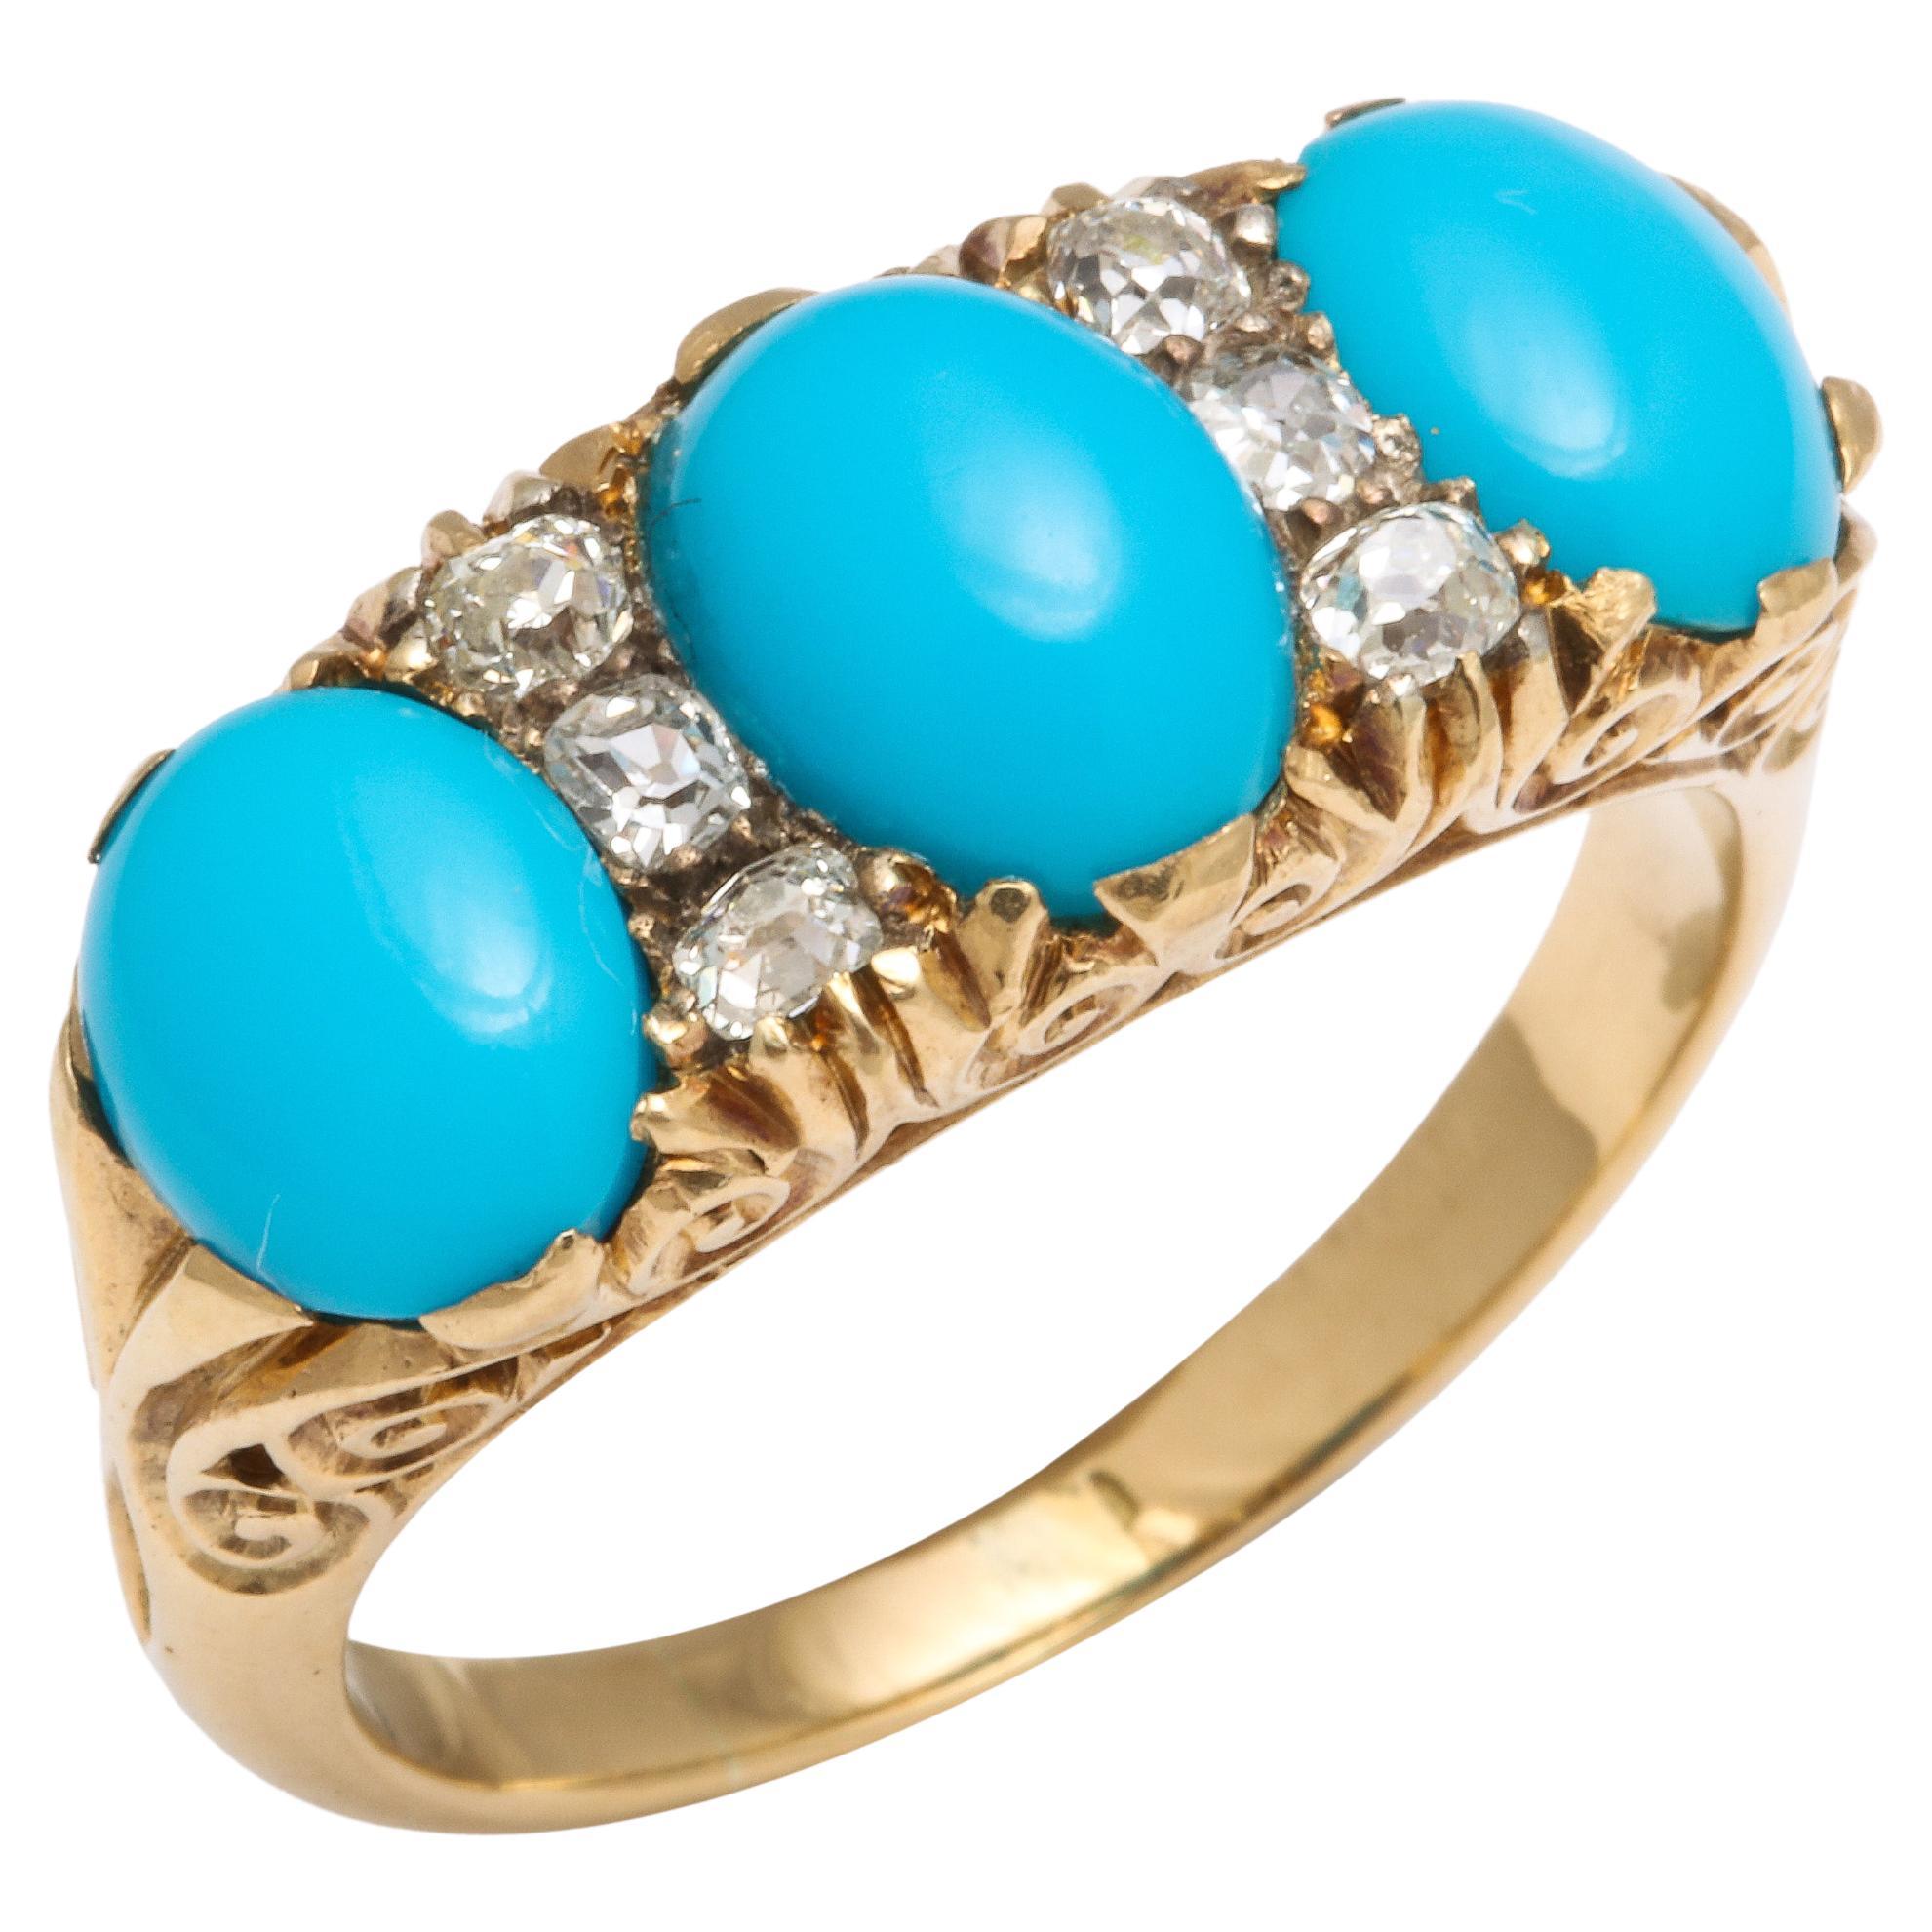 Victorian Turquoise And Diamond Ring At Stdibs Turquoise Engagement Ring